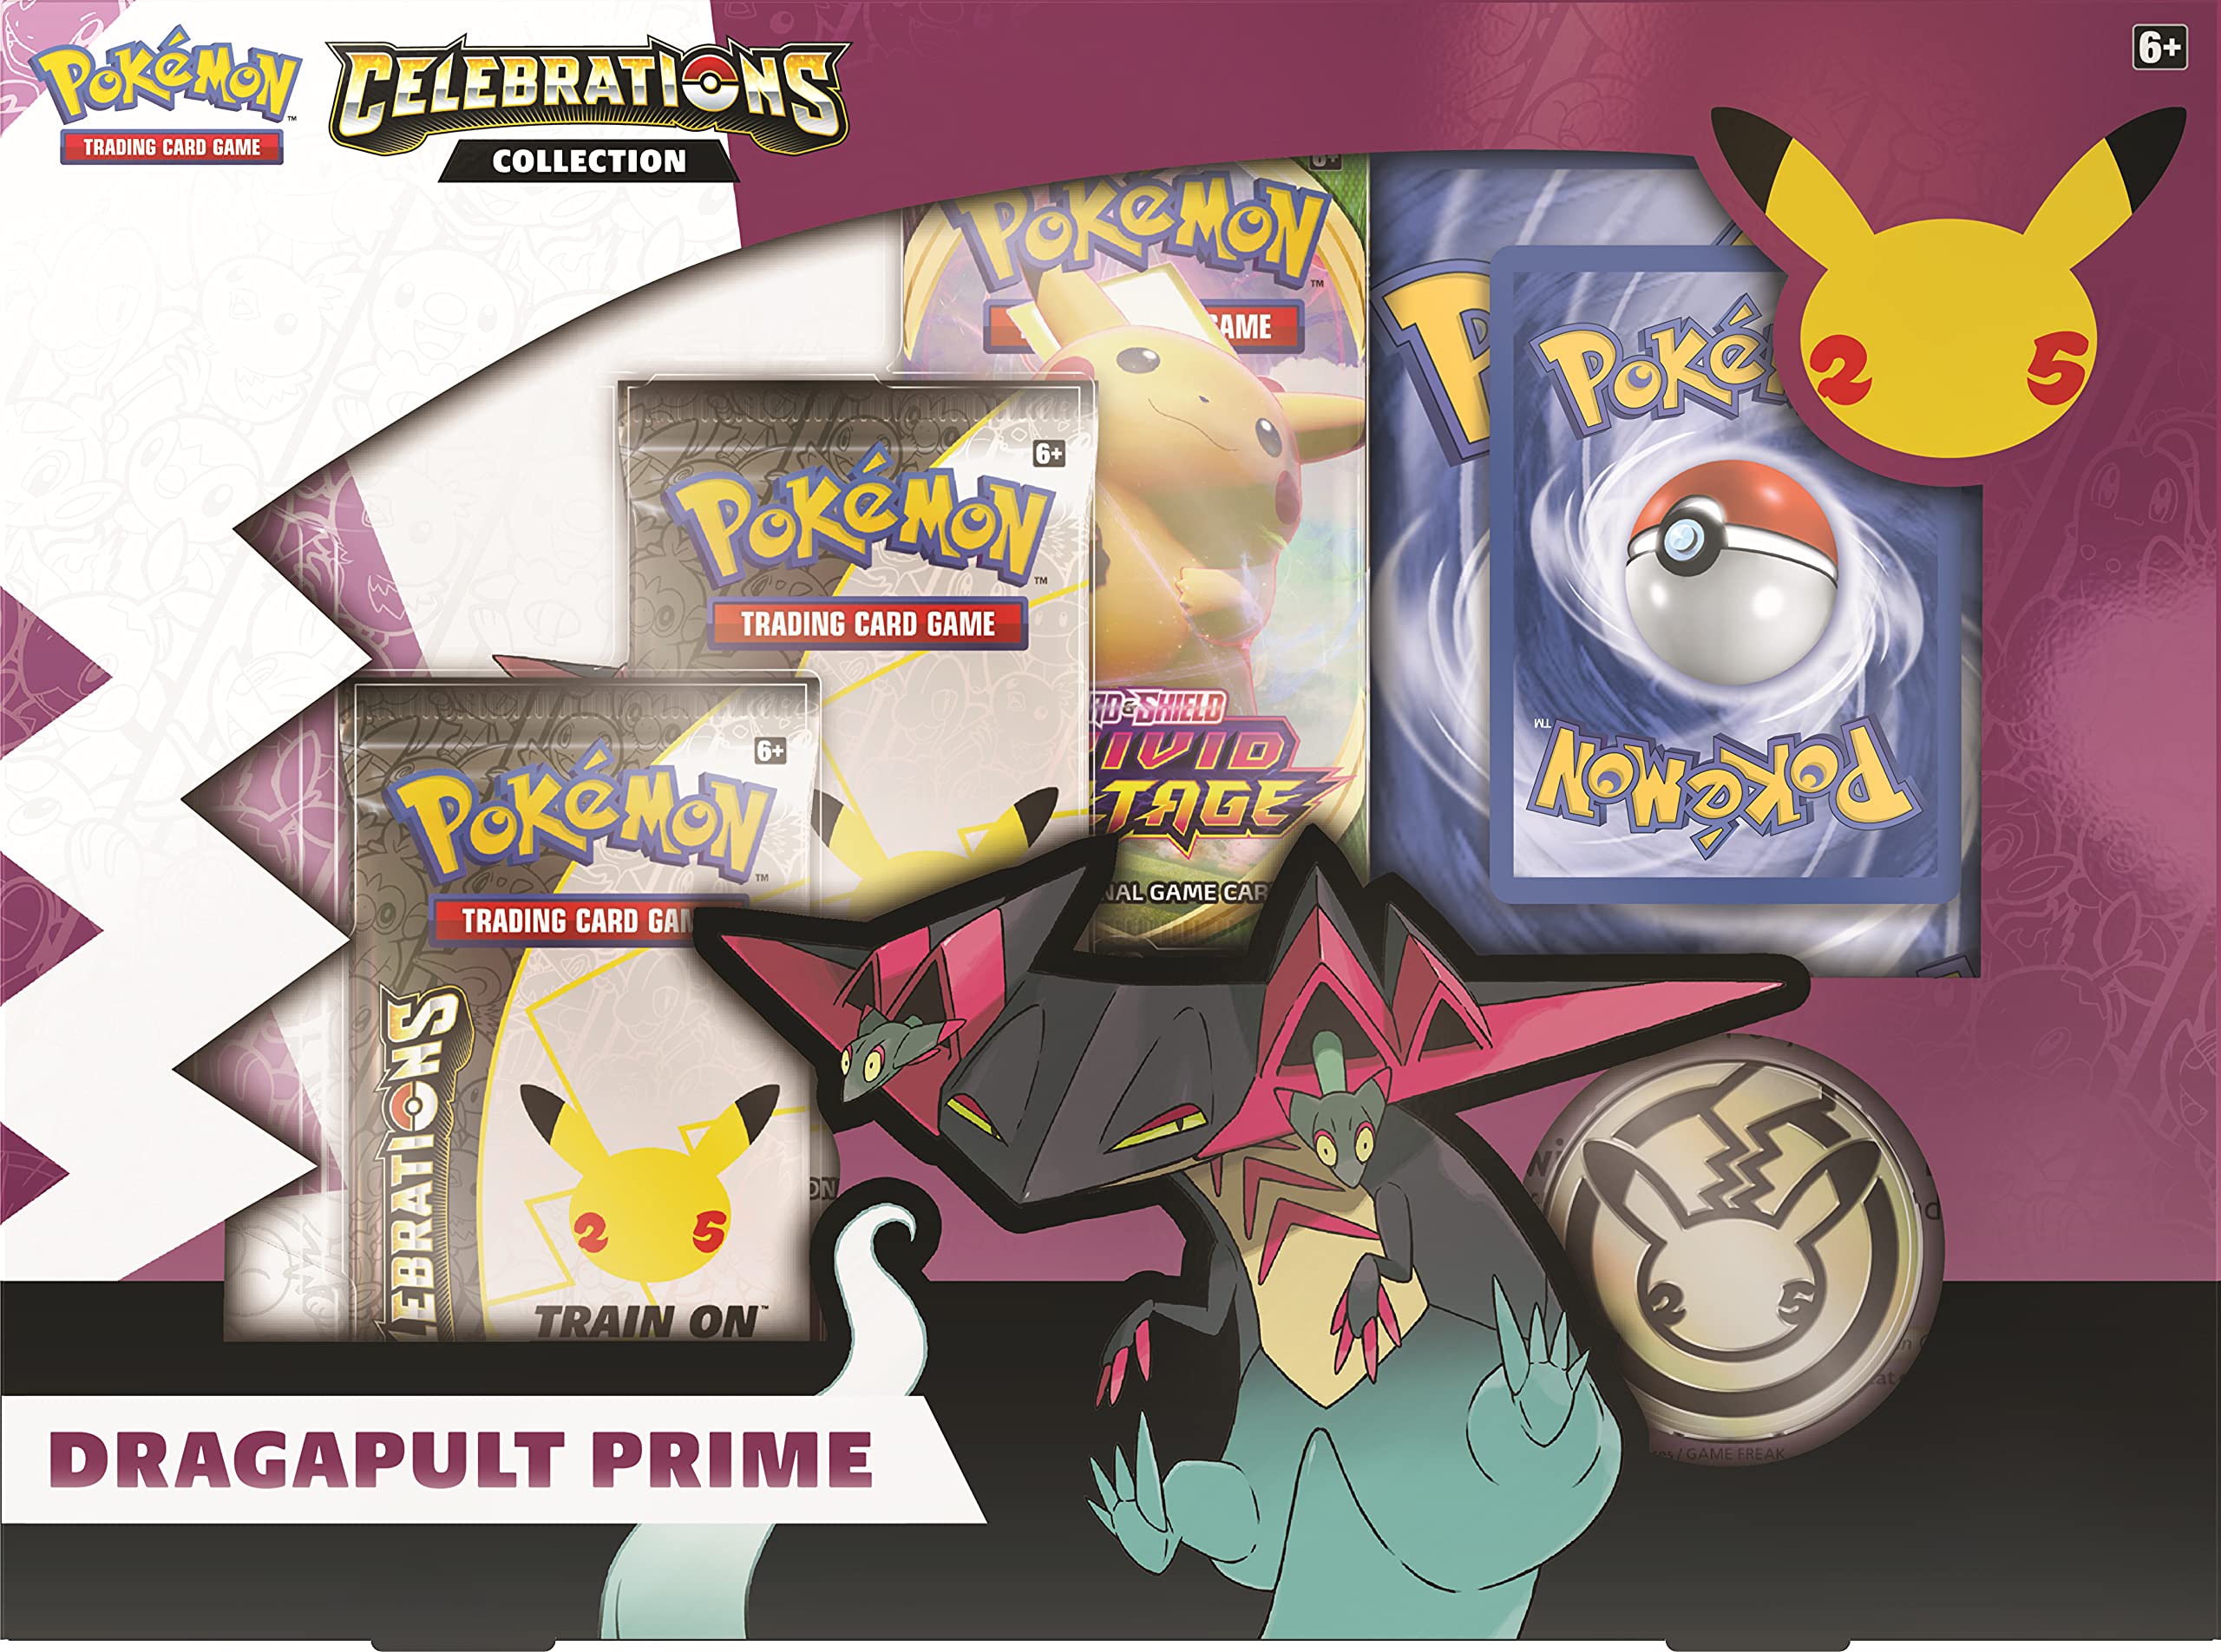 Pokémon | Celebrations Collection Dragapult Prime | Card Game | Ages 6+ | 2 Players | 10+ Minutes Playing Time